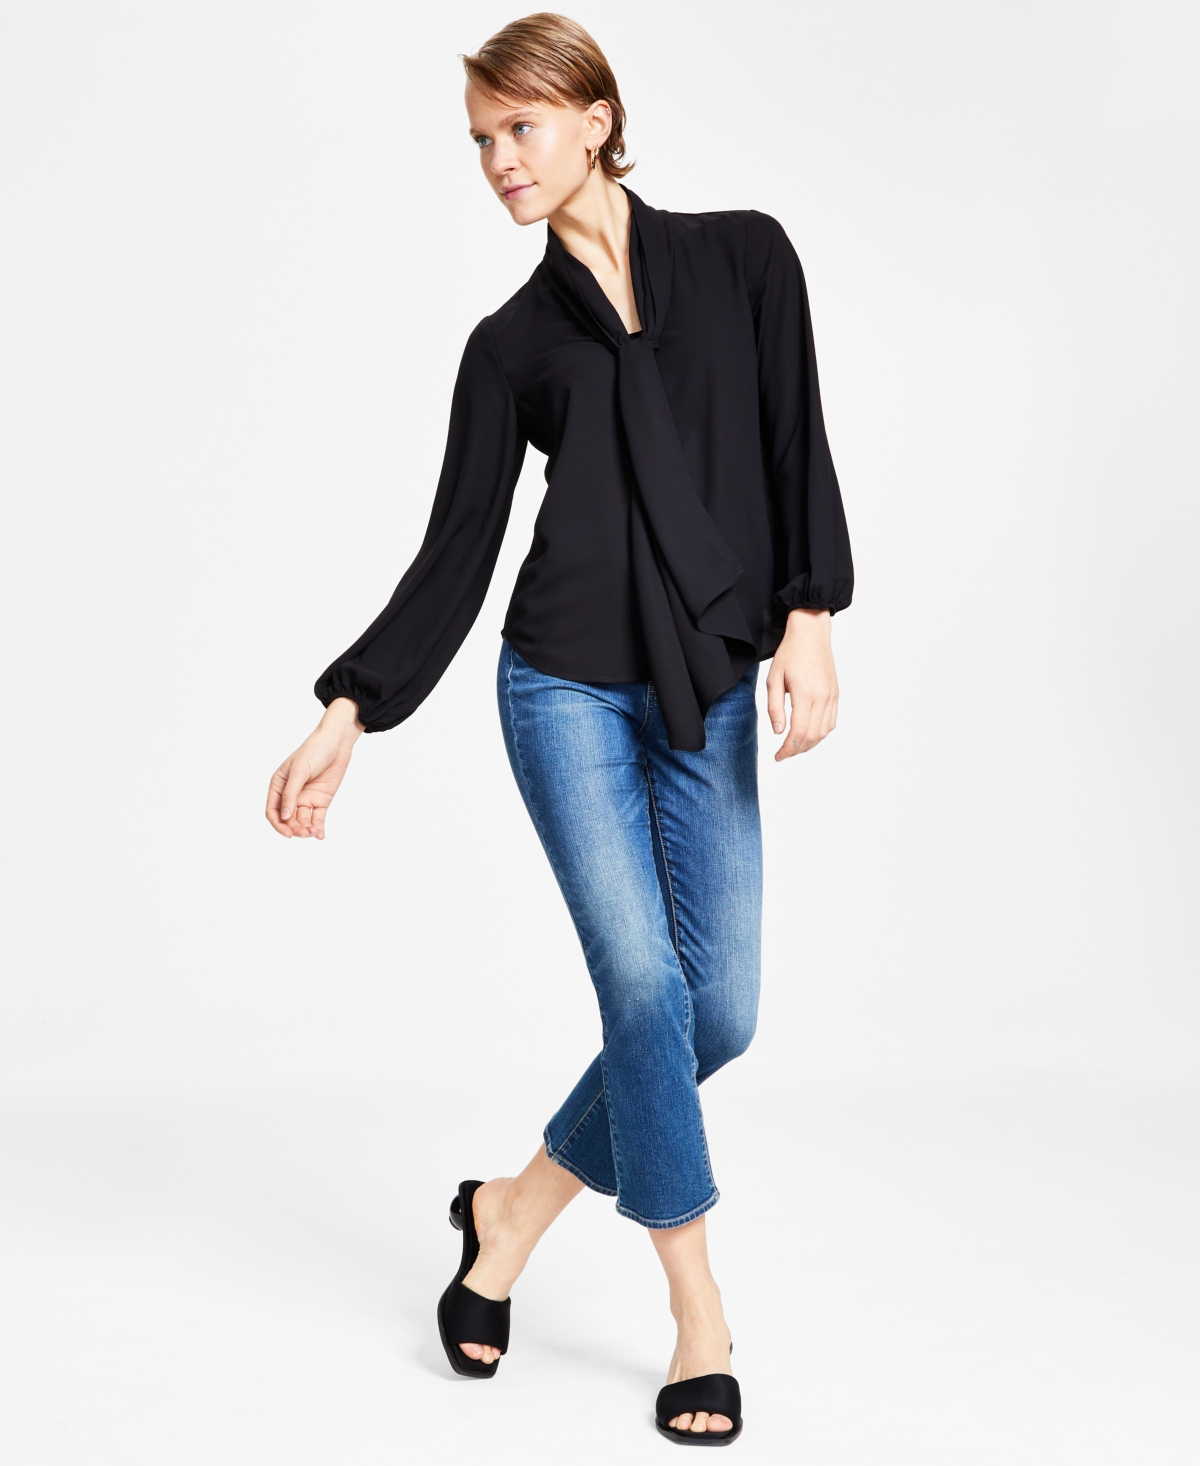 Women's Tie Neck Cinched Sleeve Blouse, Created for Macy's - Black